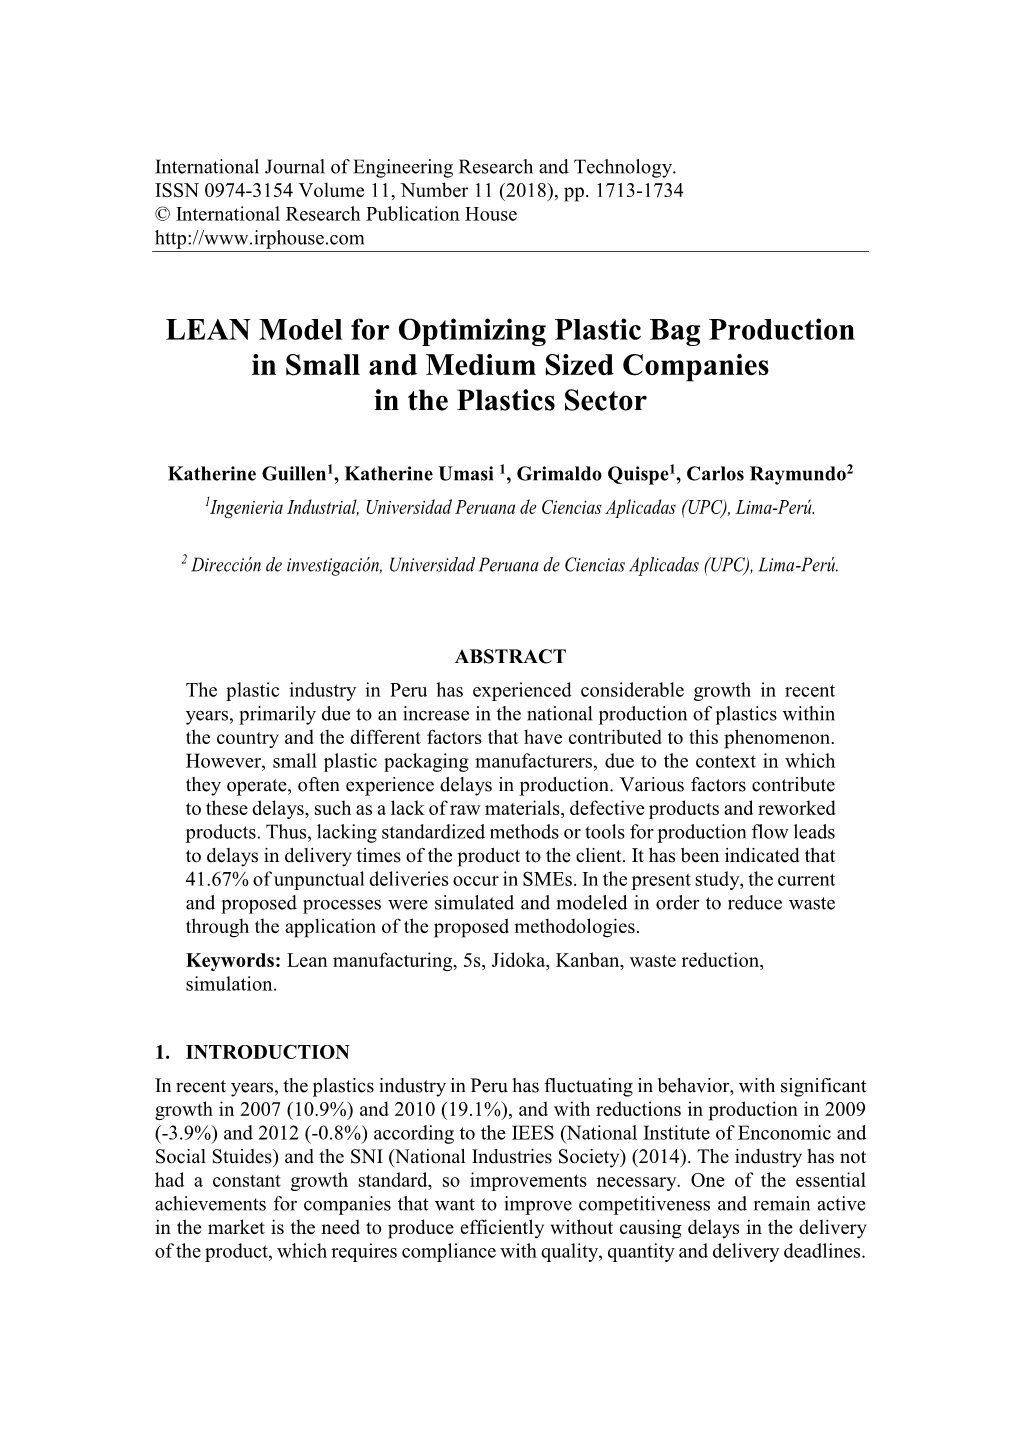 LEAN Model for Optimizing Plastic Bag Production in Small and Medium Sized Companies in the Plastics Sector